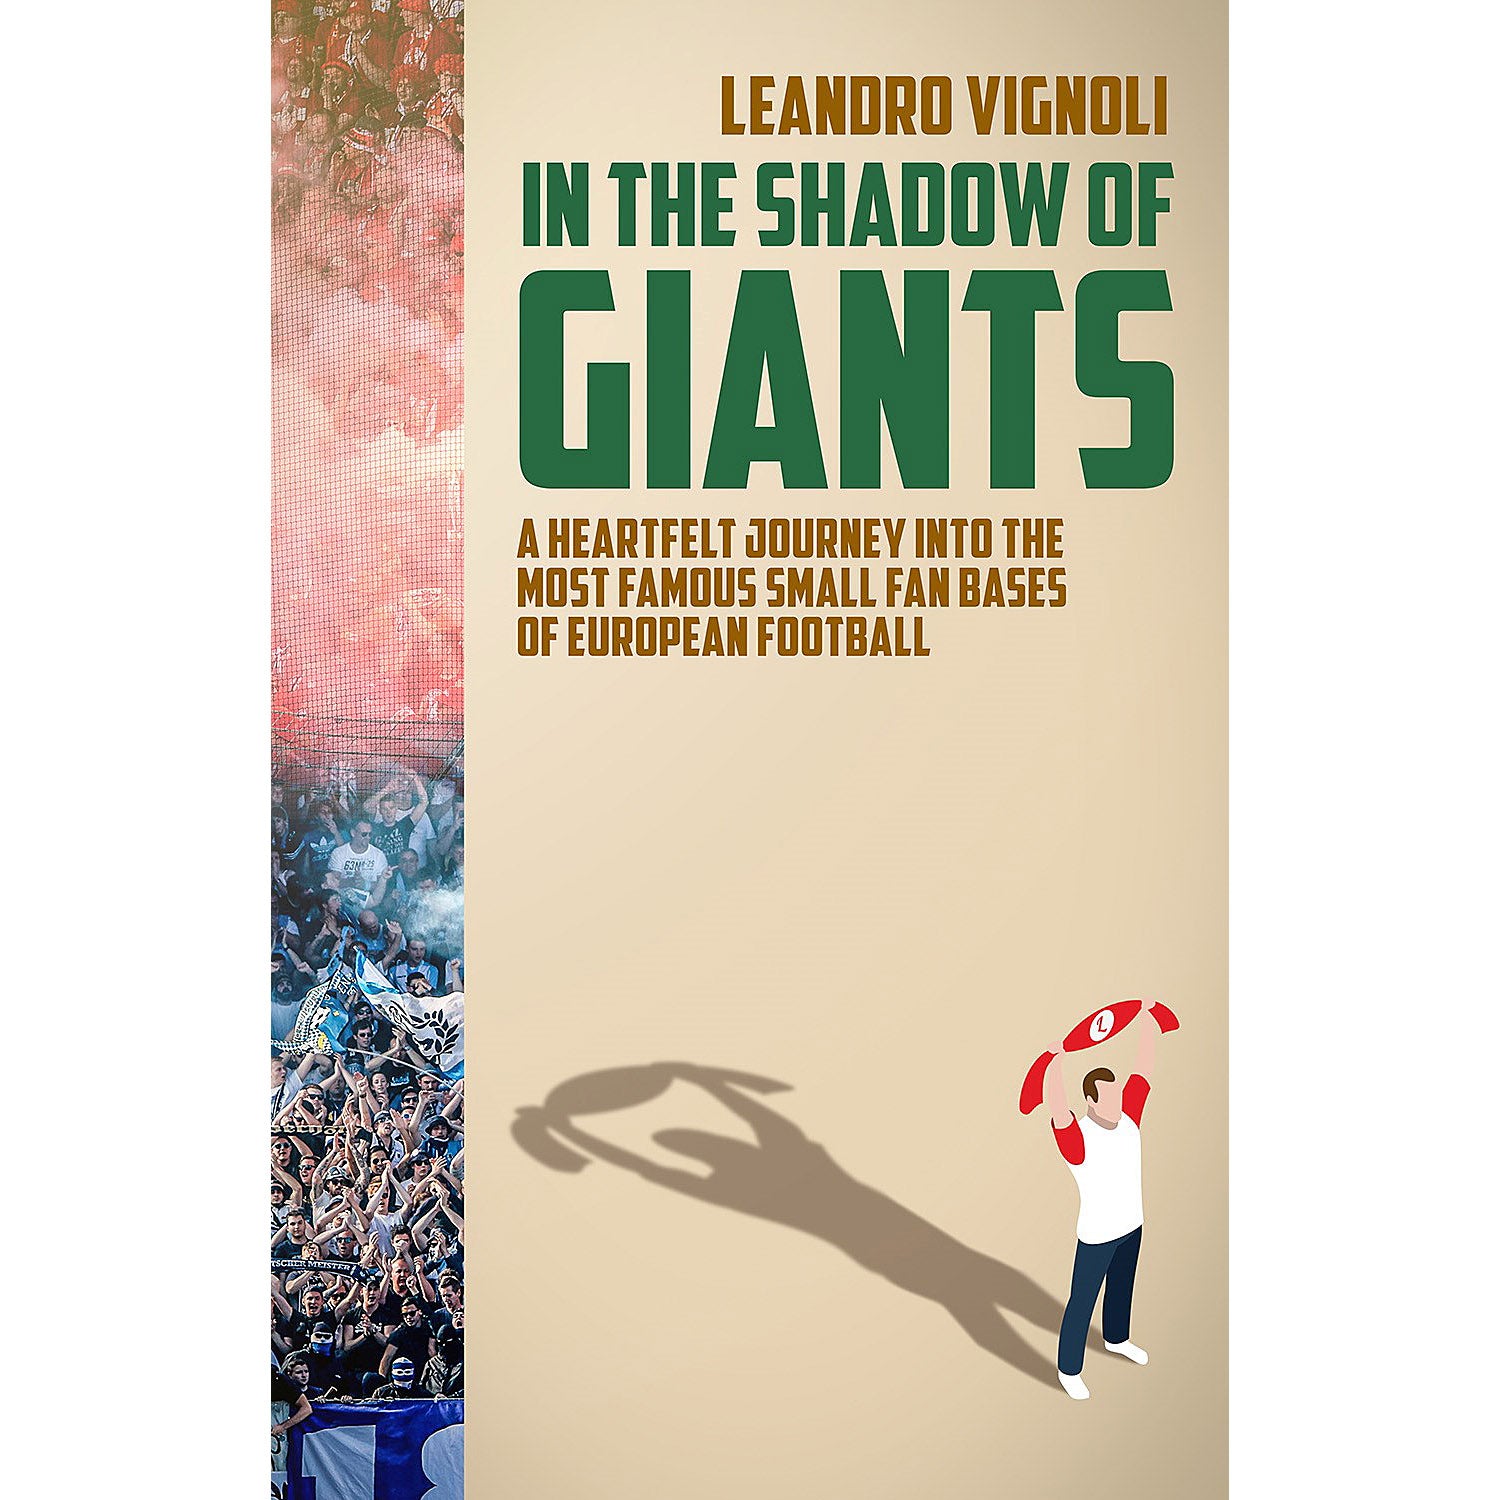 In the Shadow of Giants – A Heartfelt Journey into the Most Famous Small Fan Bases of European Football